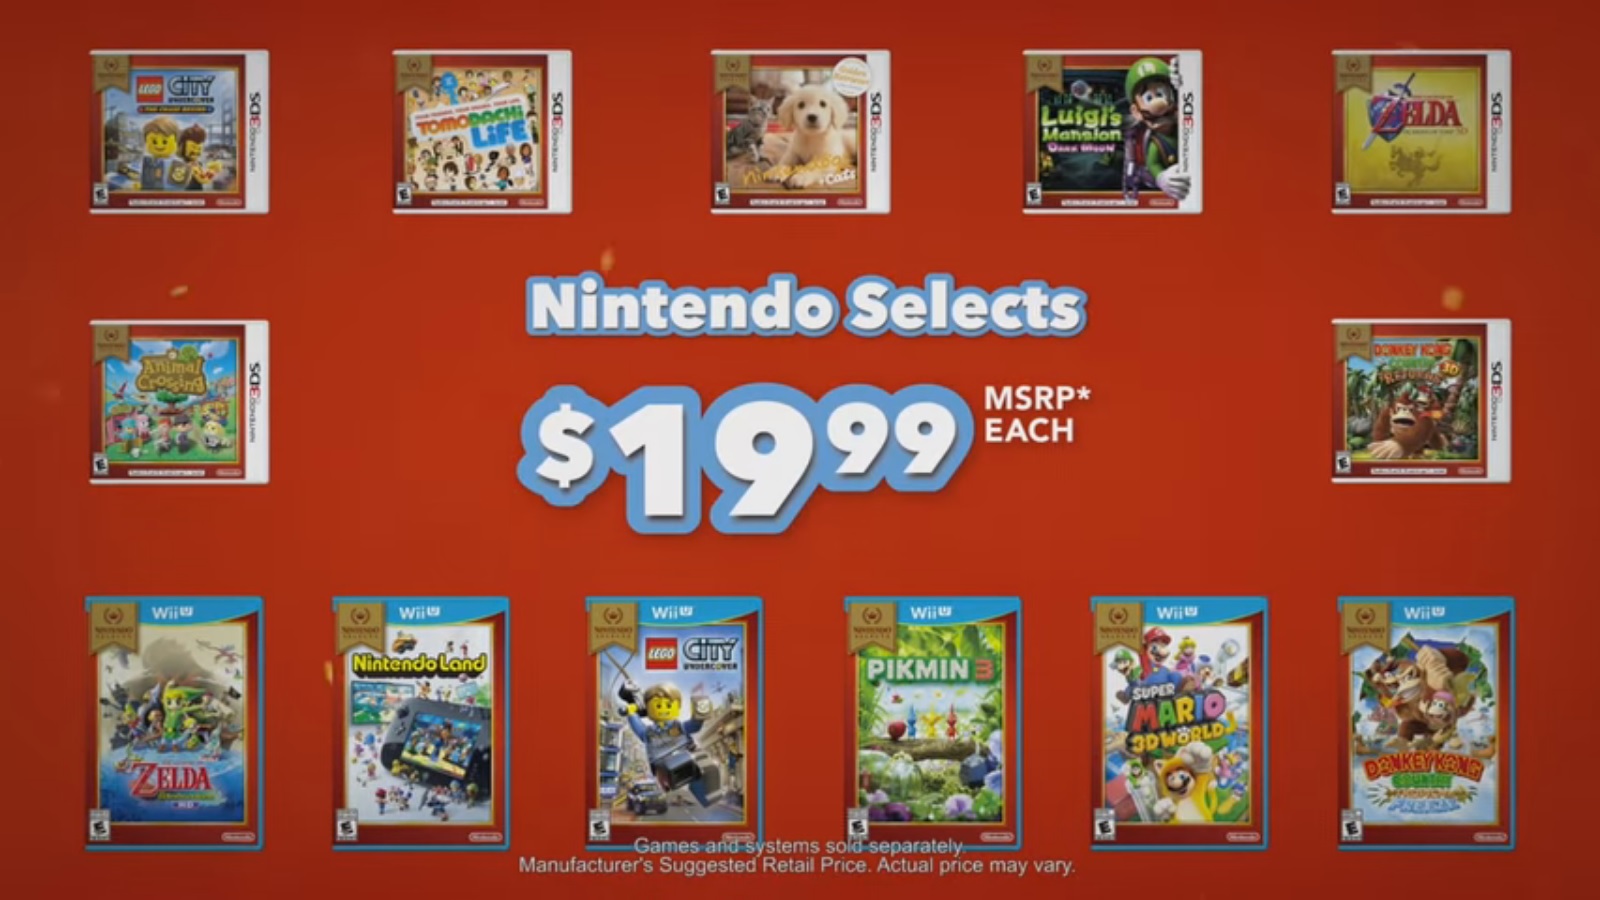 New promo video for Nintendo Selects